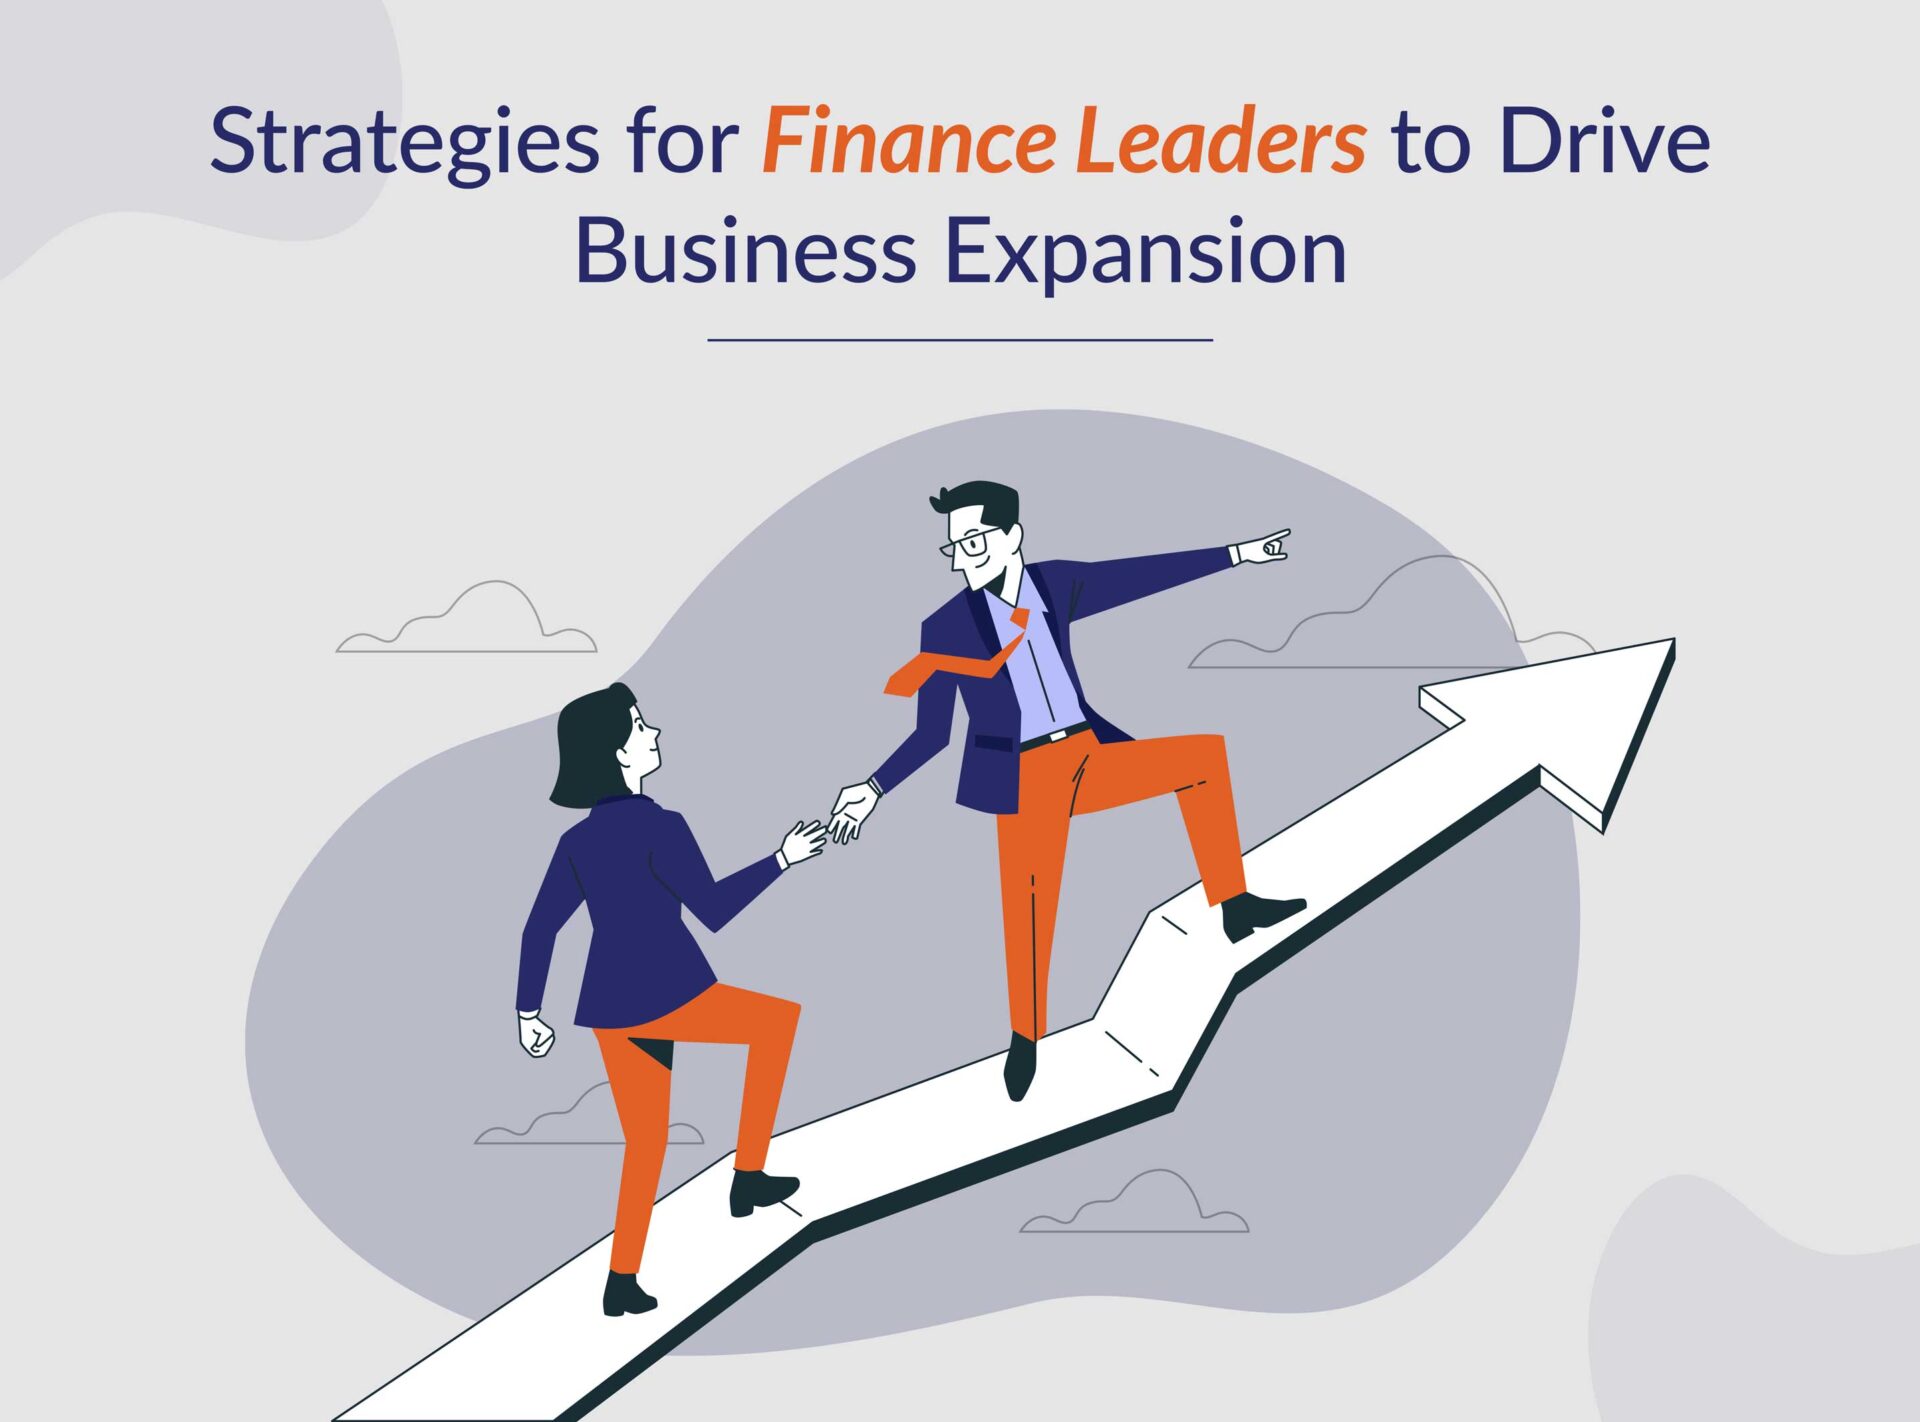 Strategies for Finance Leaders to Drive Business Expansion